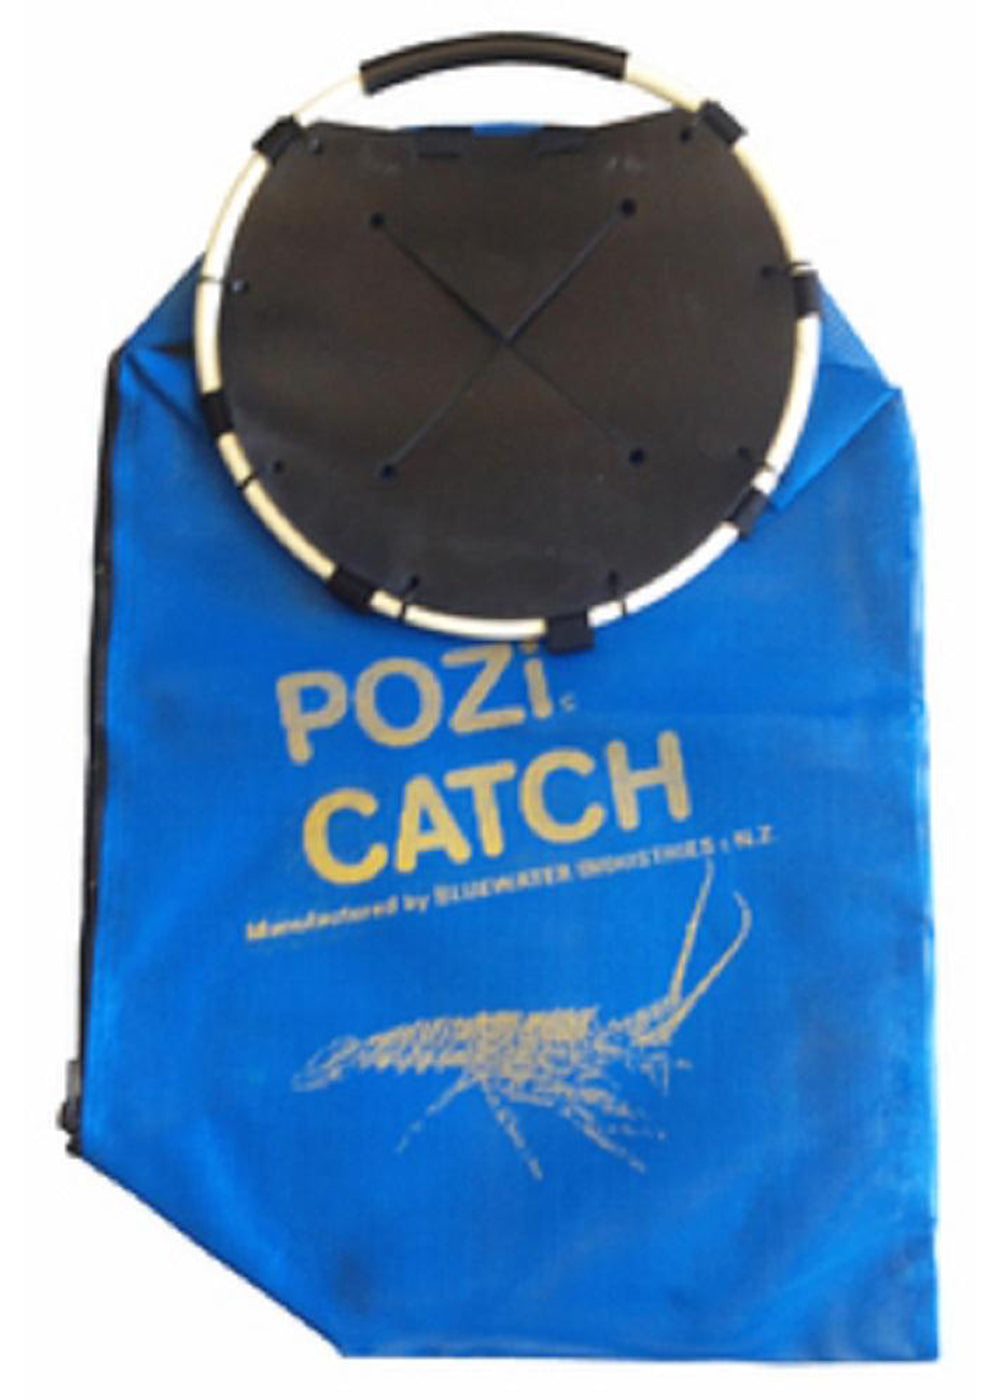 Cressi Pozi Catch Bag - Adreno - Ocean Outfitters